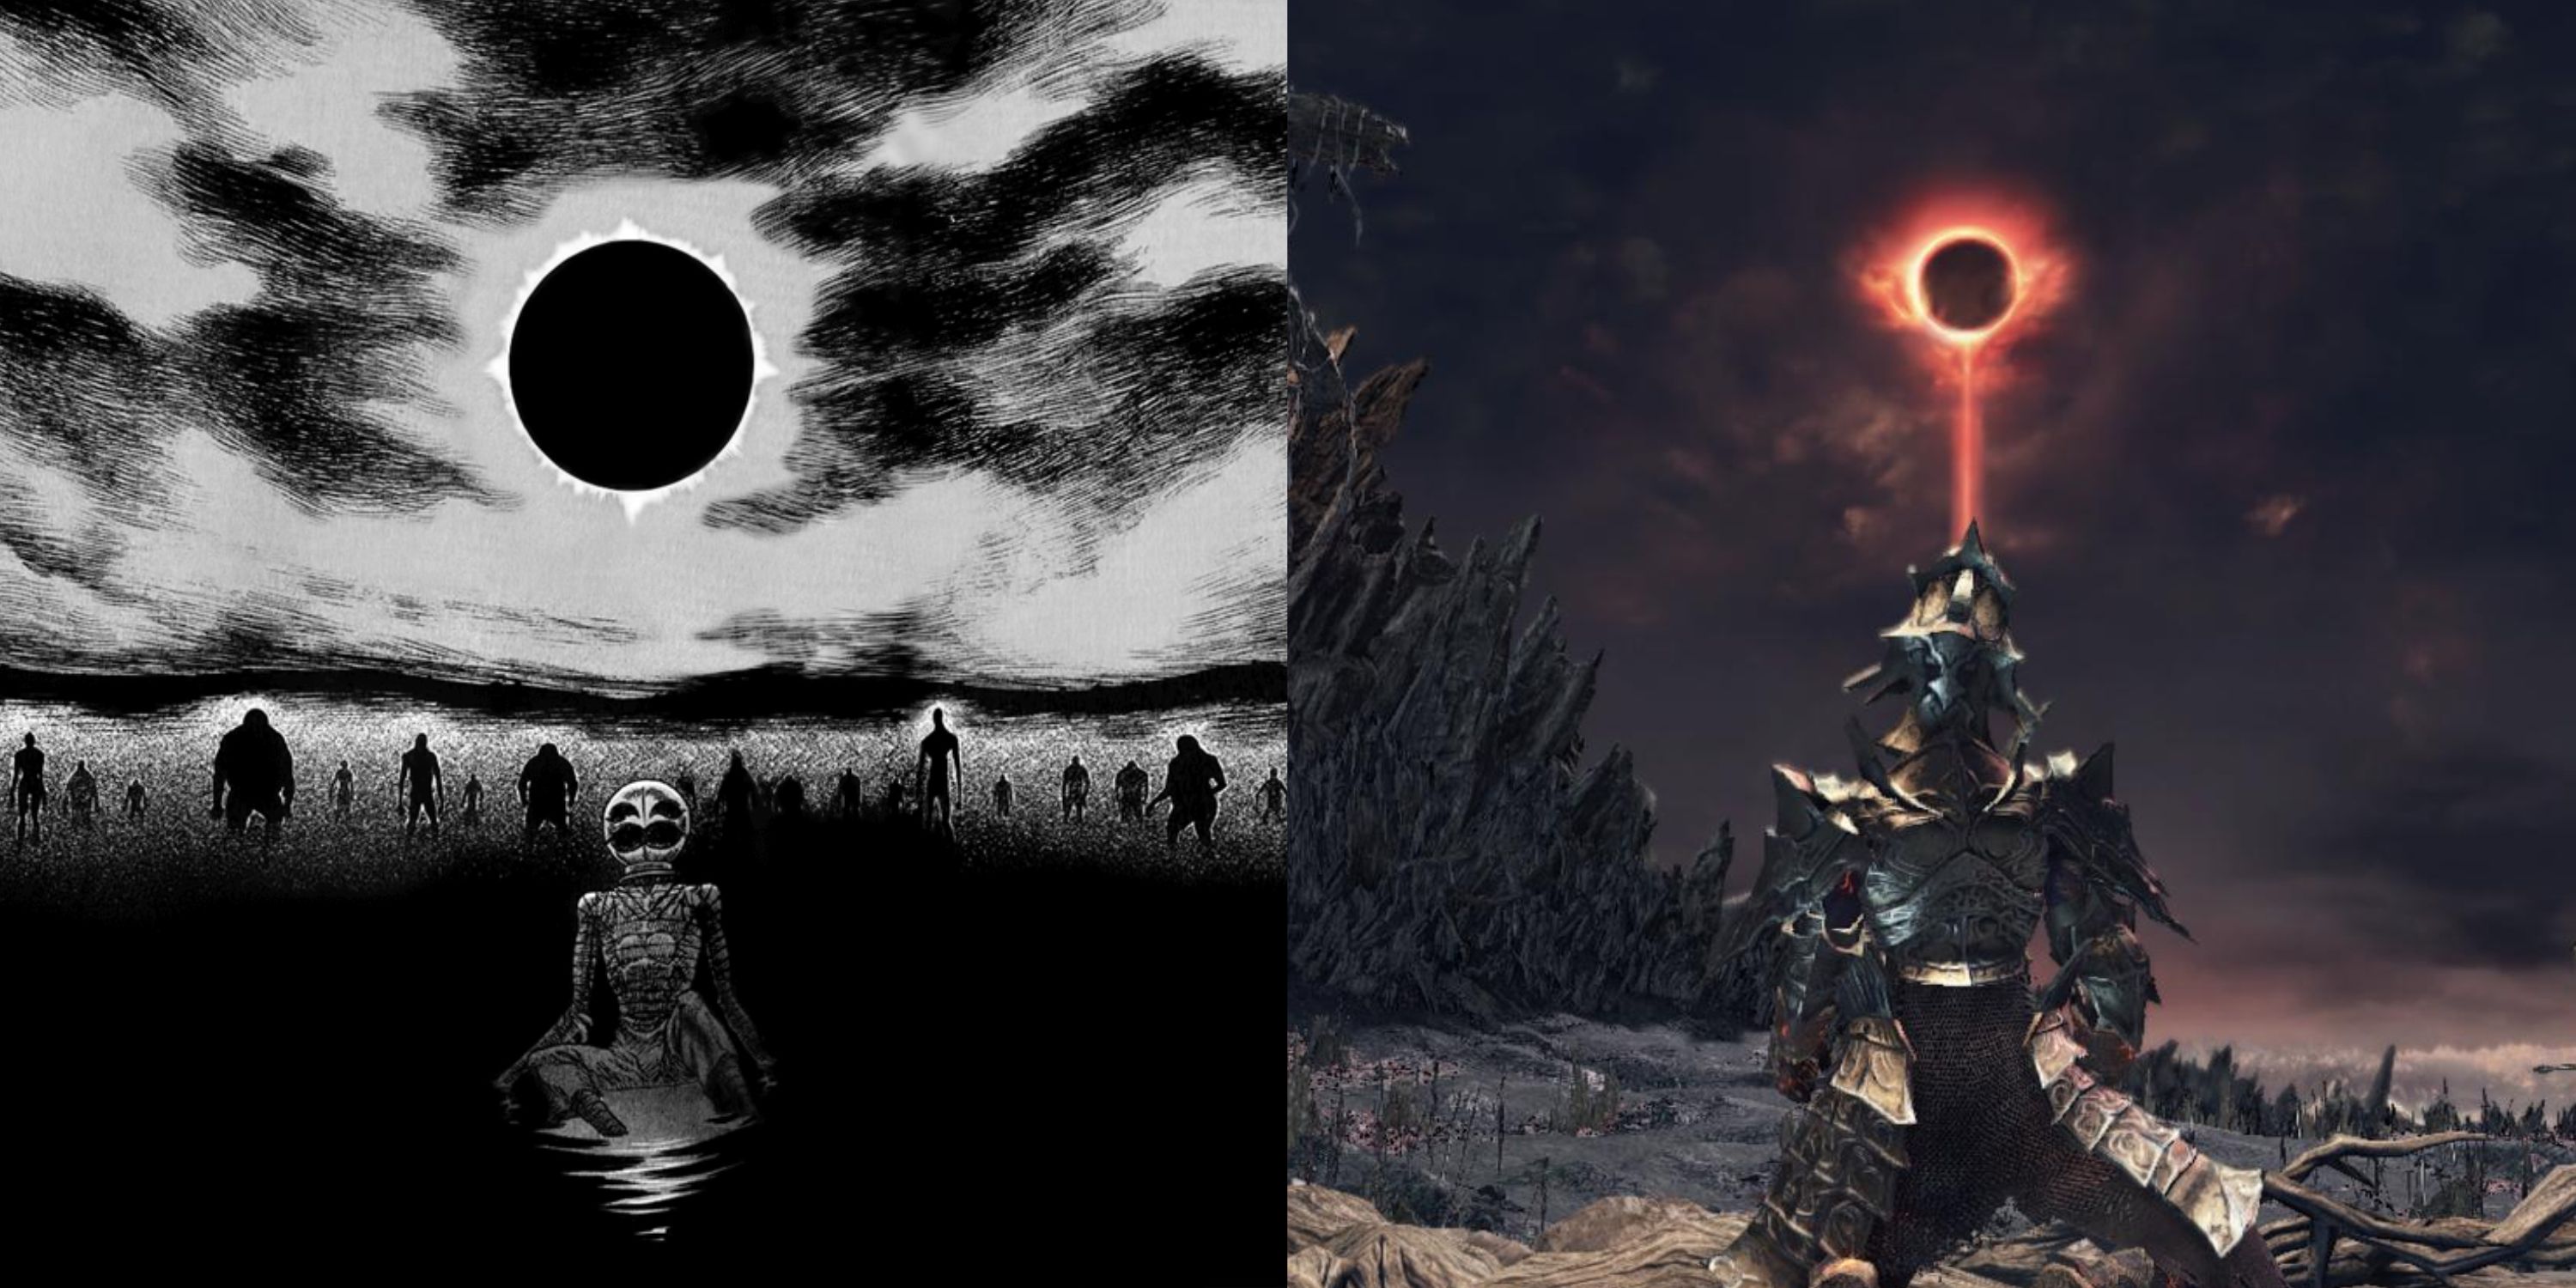 Berserk's Griffith succumbing to his anguish and ushering in the Eclipse opposite Dark Souls 3's Unkindled Ash in Soul of Cinder arena